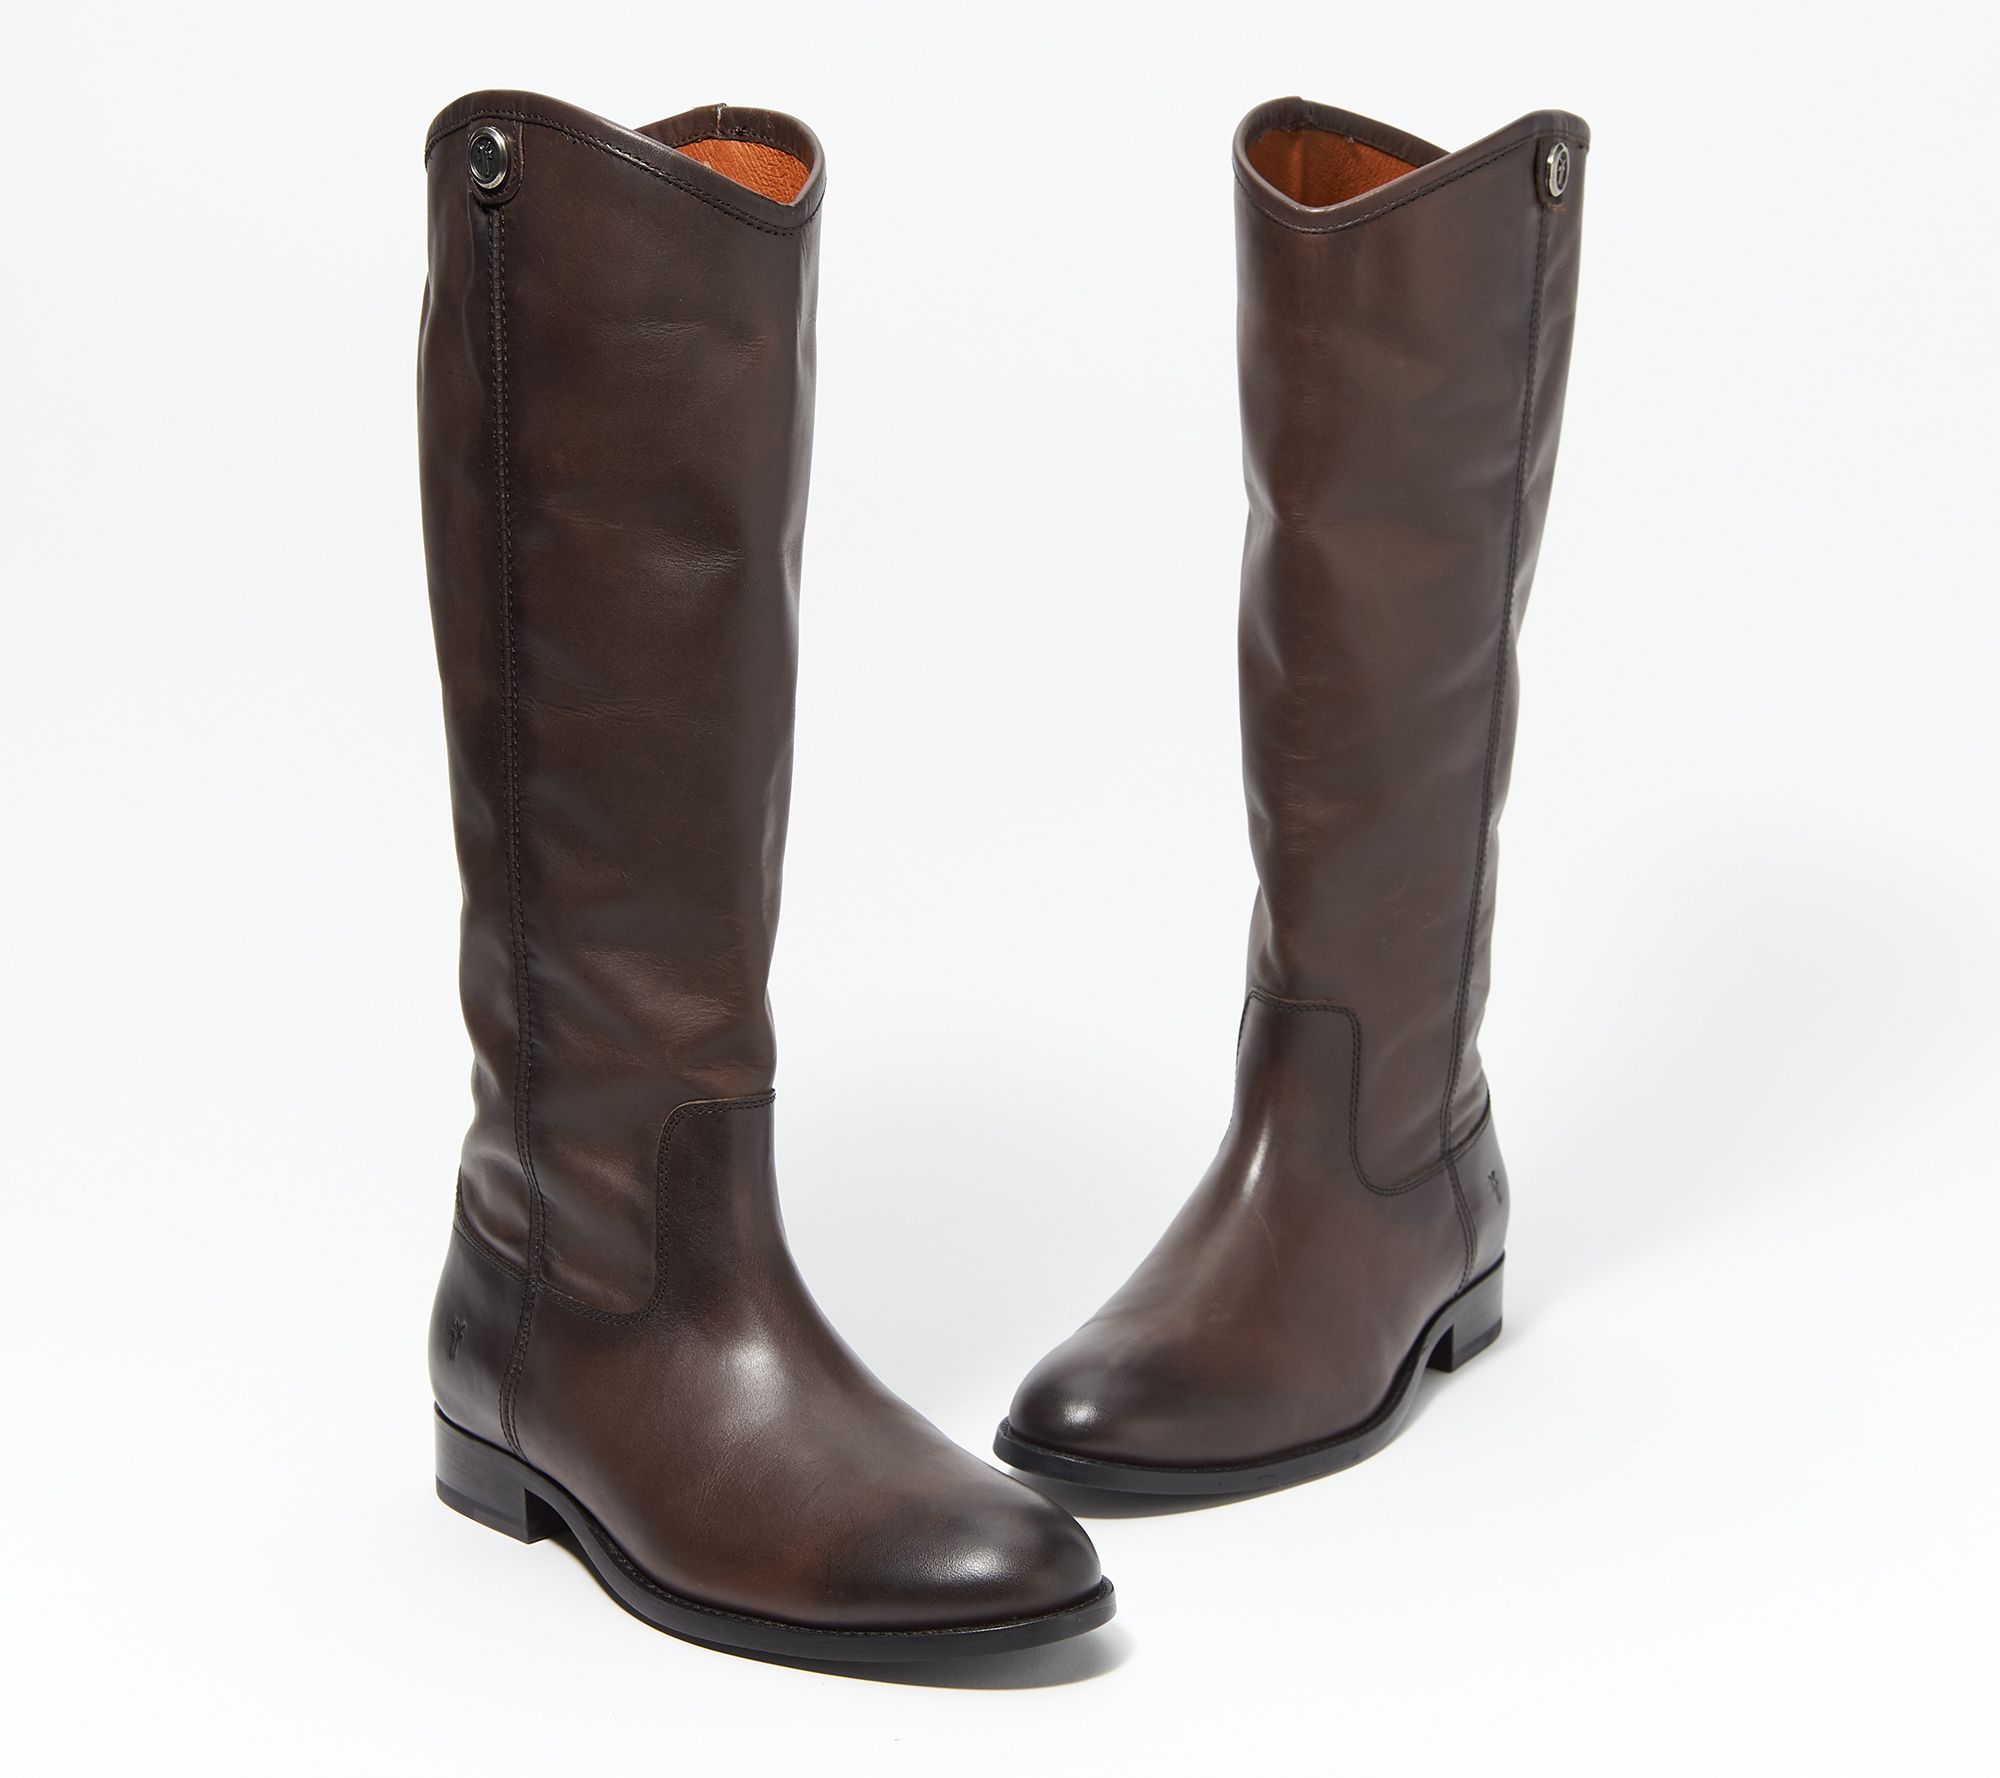 frye high shaft leather boots